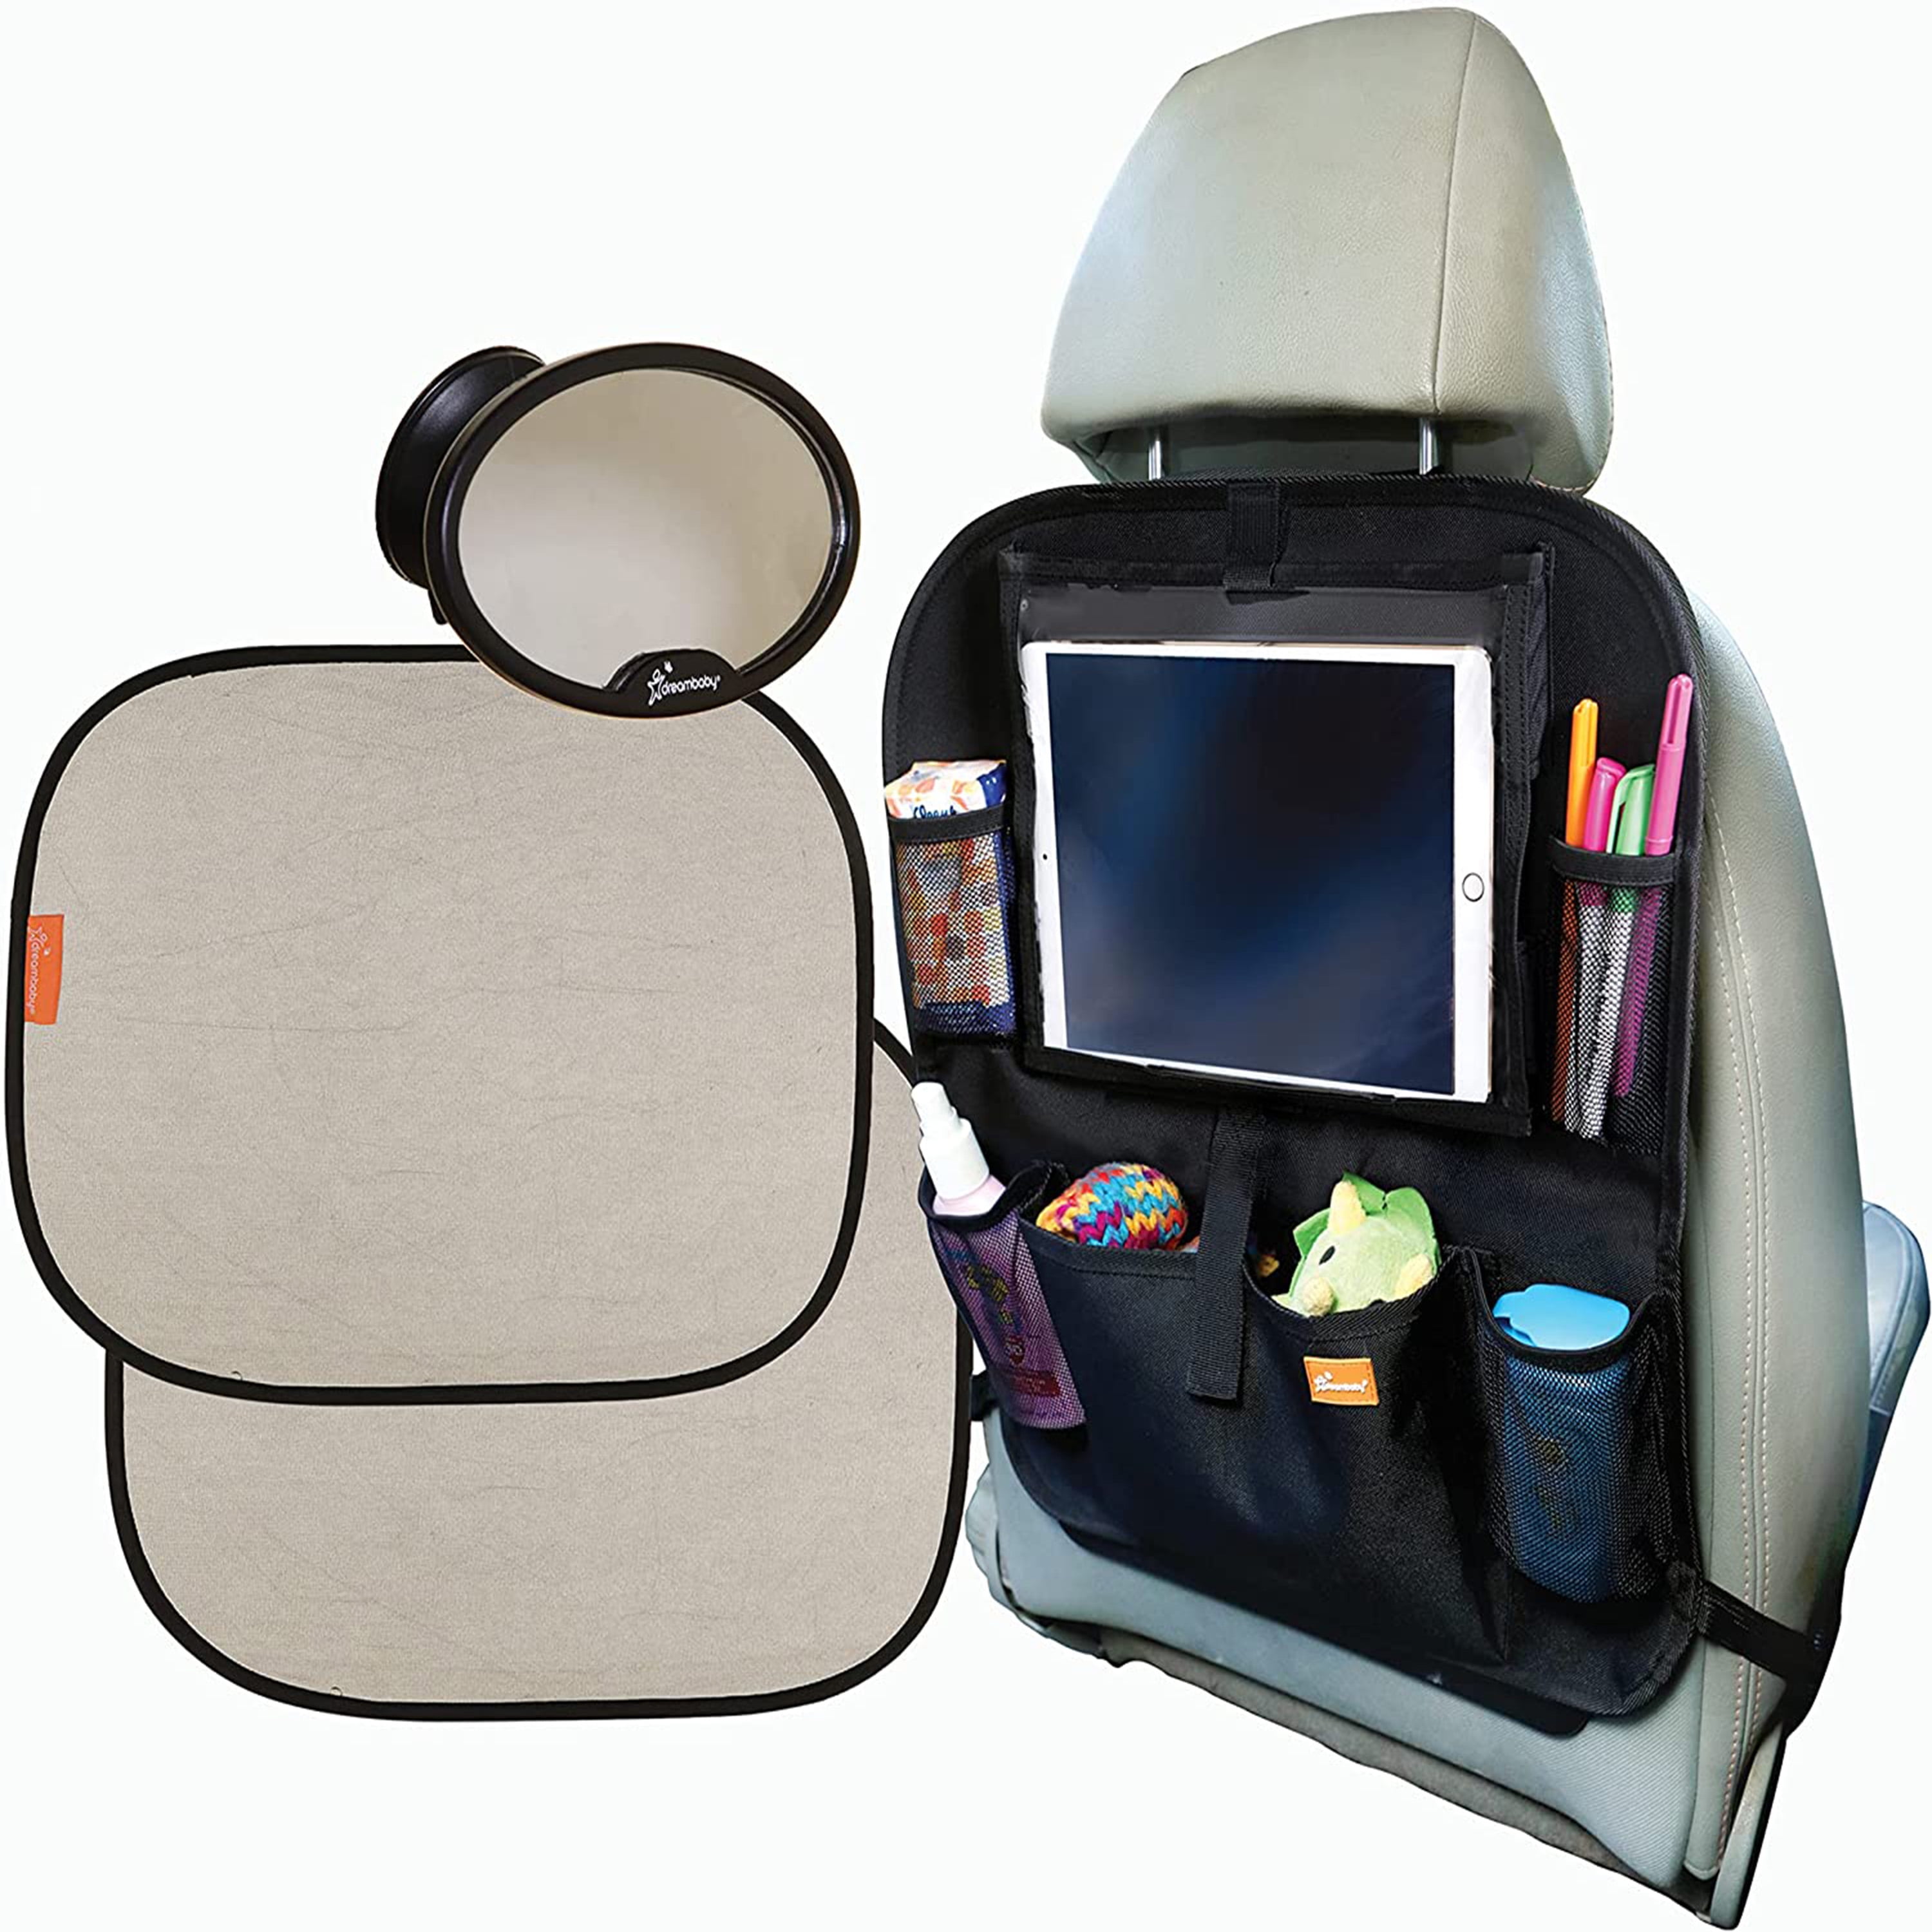 Dreambaby Toddler 3-in-1 Baby Safety Travel Car Kit Bundle Set - Multicolor